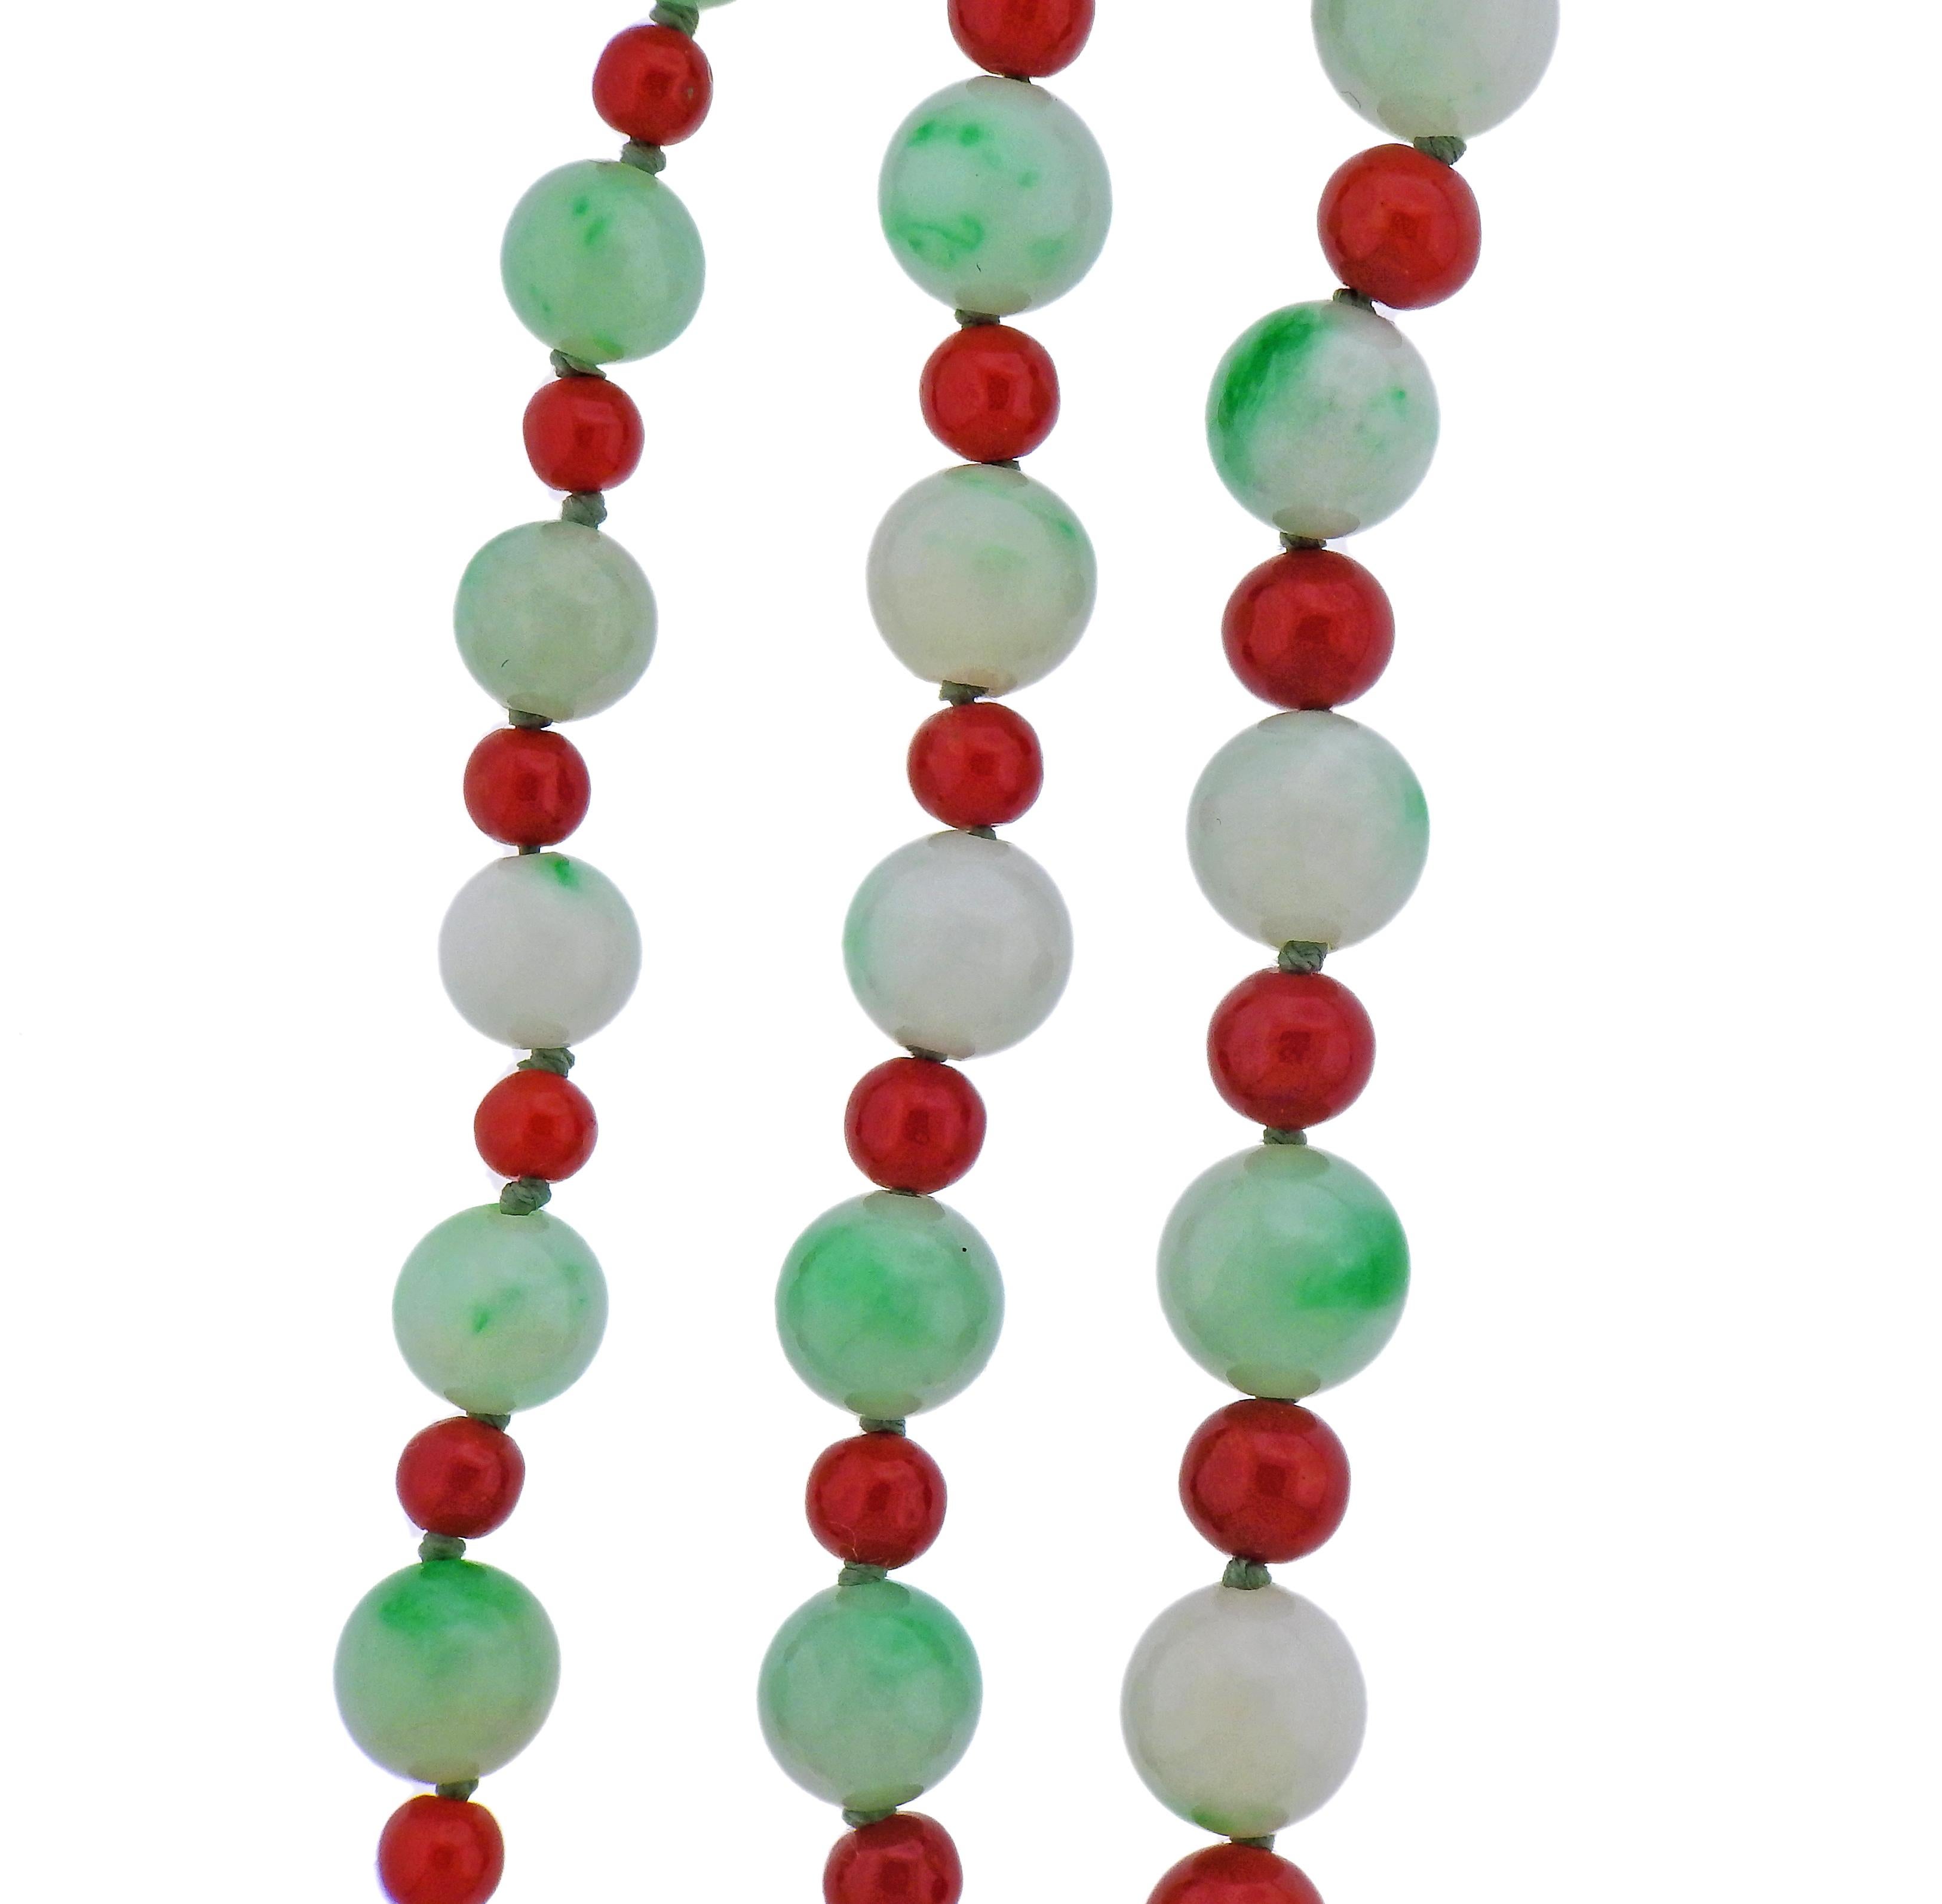 Platinum Tiffany & Co diamond clasp long necklace, with 6-9.5mm jade beads and 4-9.5mm corals. Weight - 156.3 grams. Diamond is approx. 0.74ct. Necklace is 75